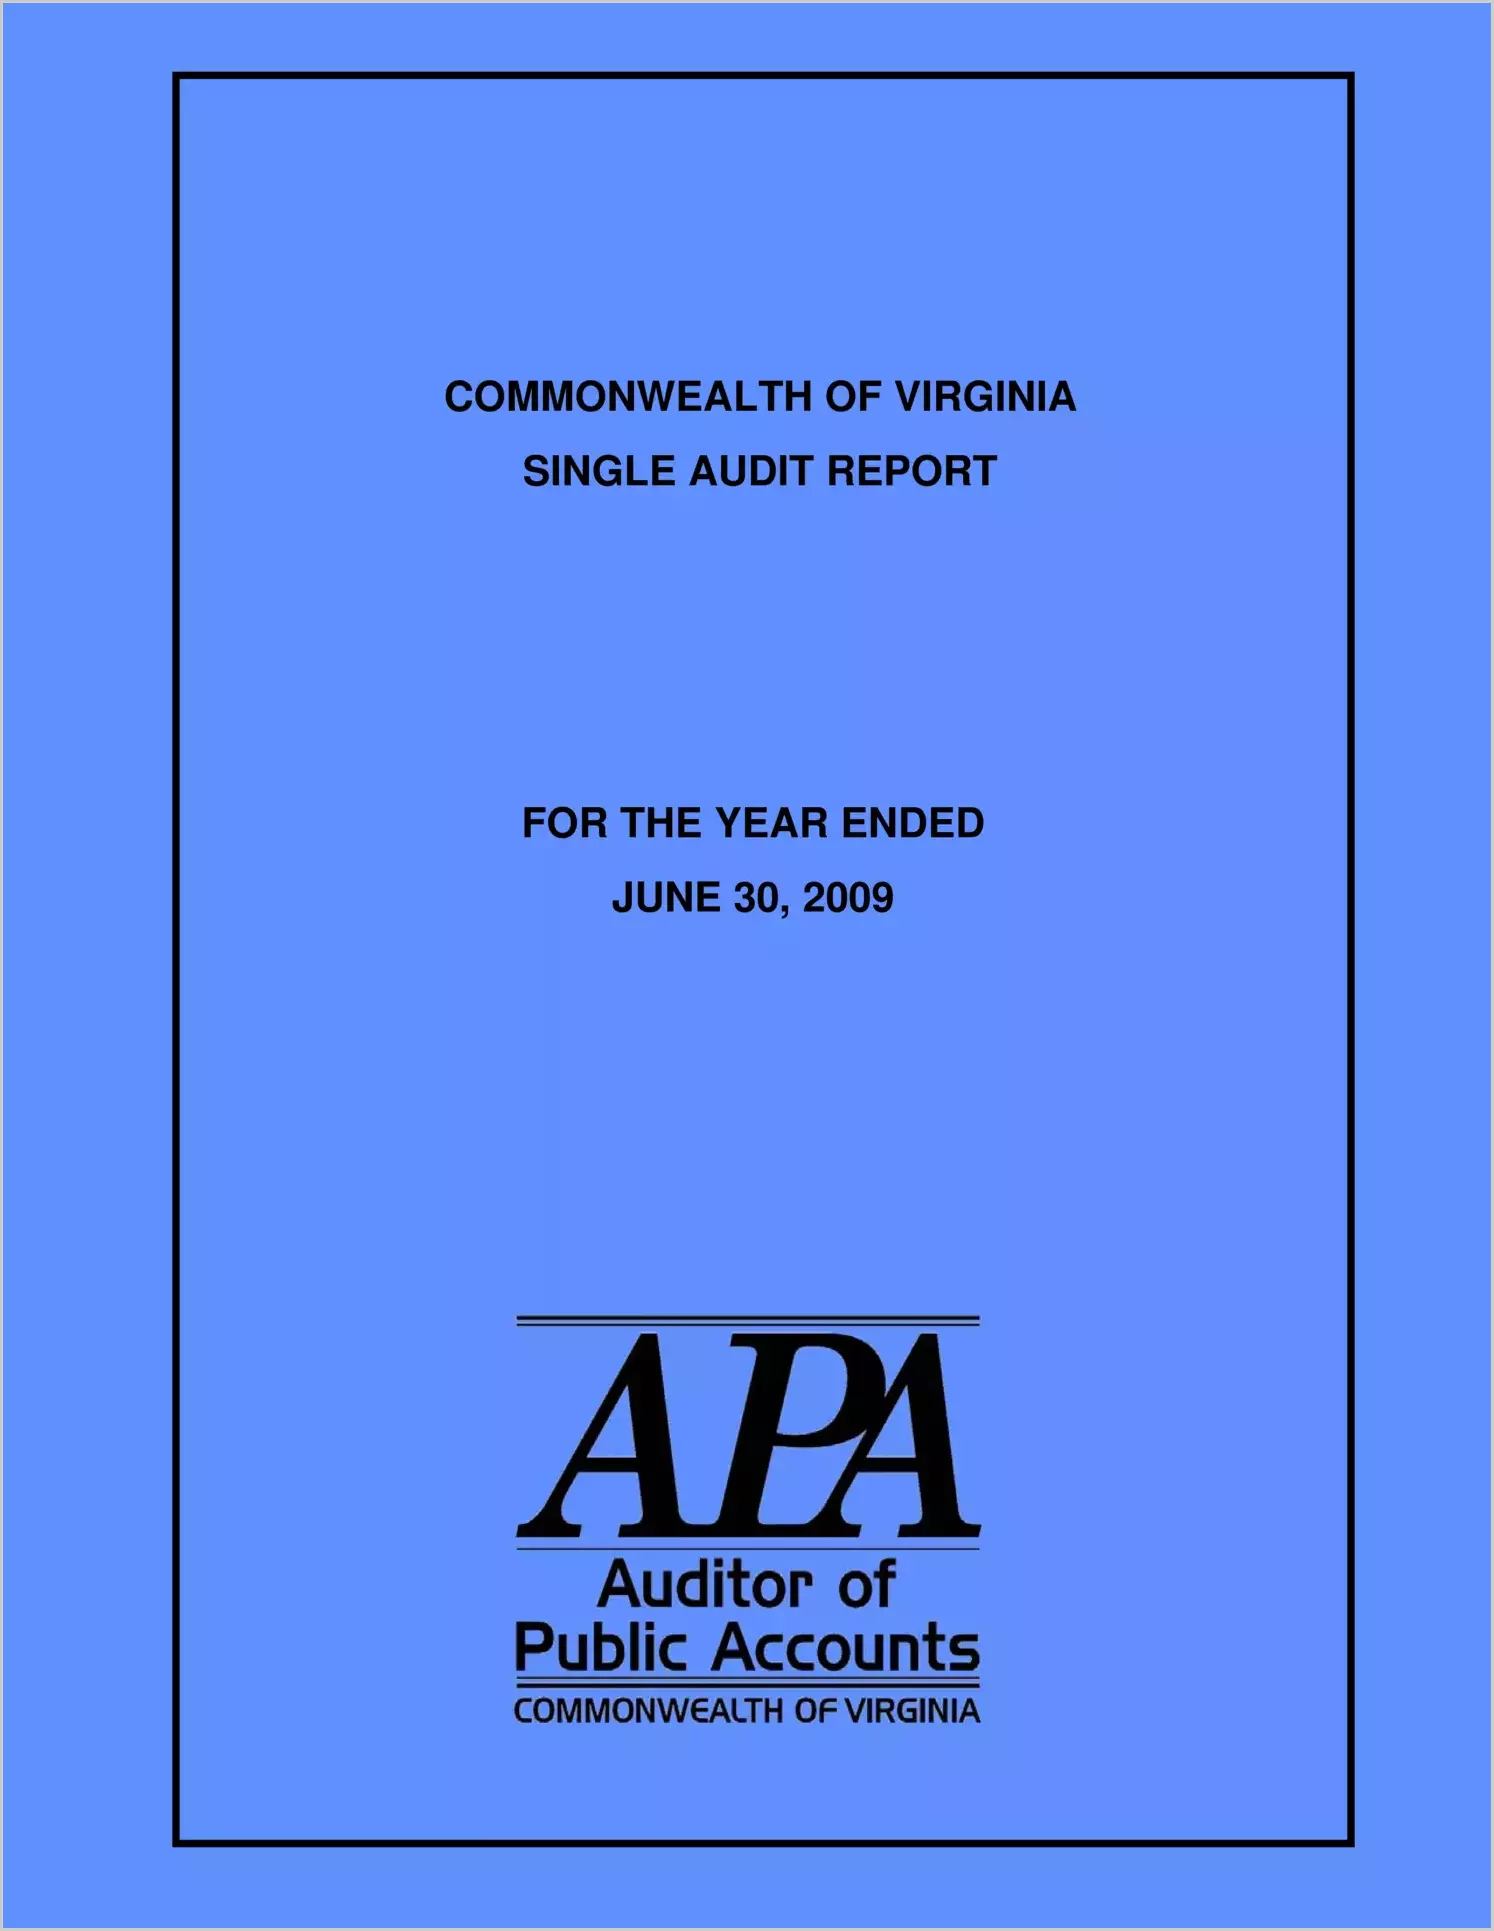 Commonwealth of Virginia Single Audit Report for the Year Ended June 30, 2009